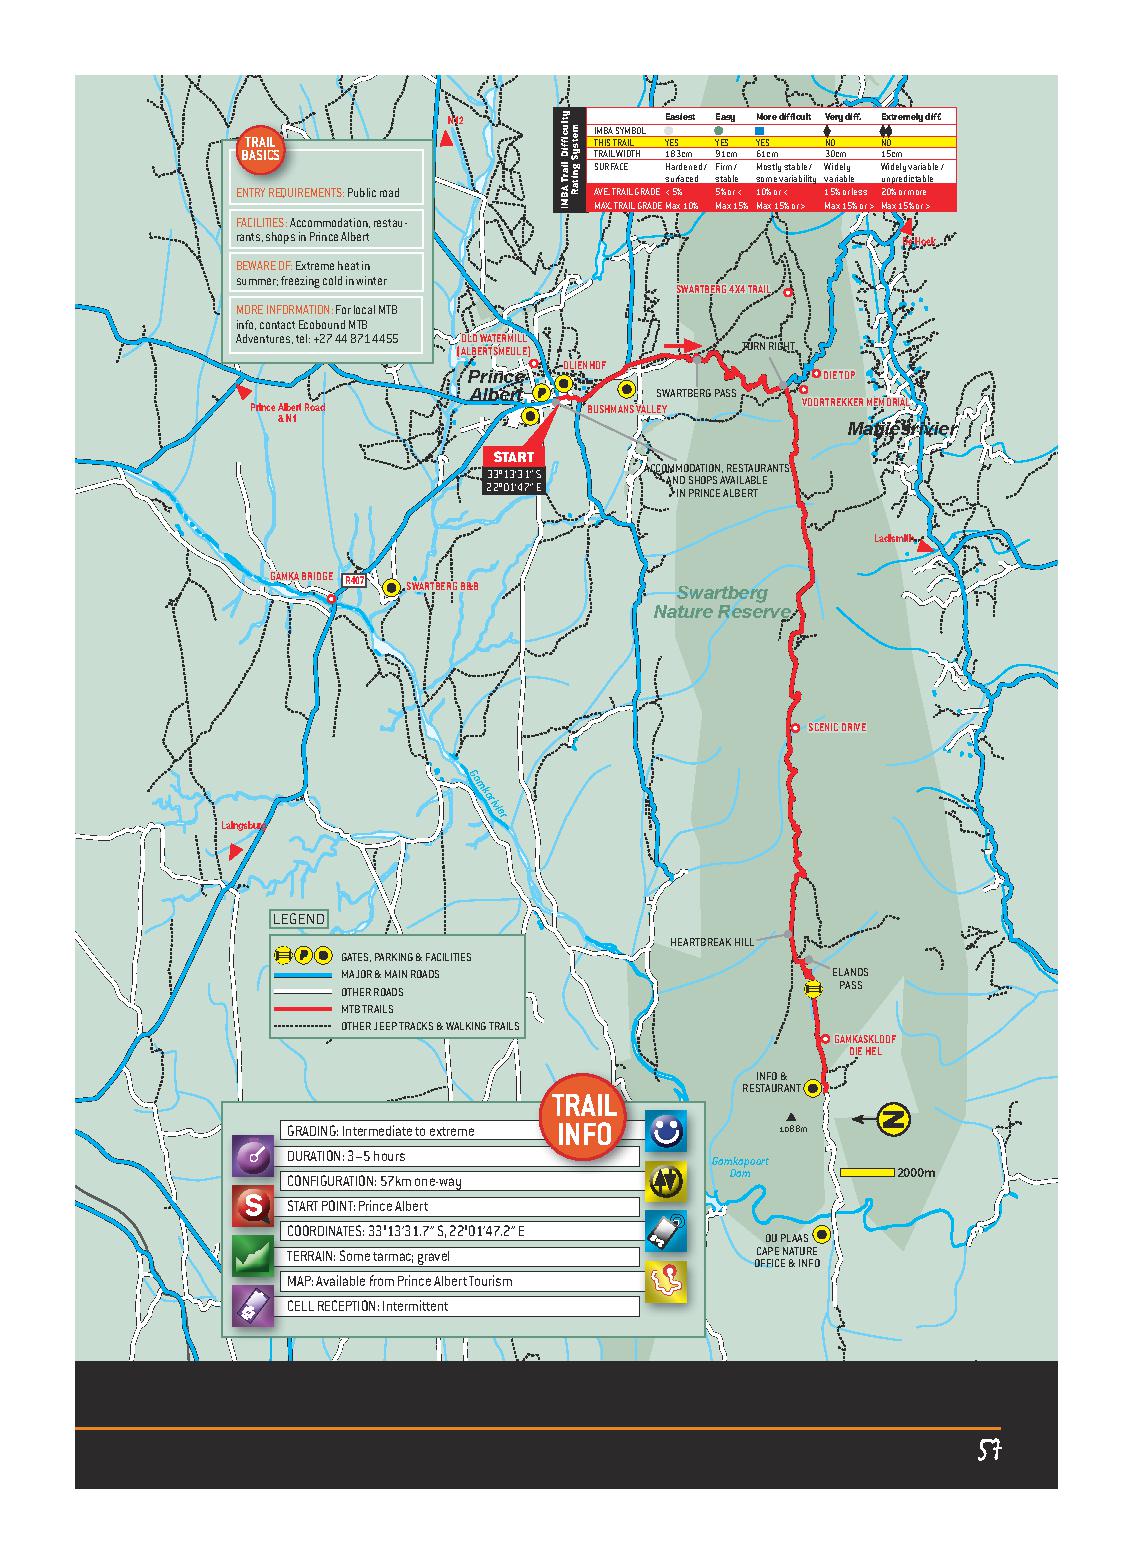 Prince Albert Swartberg Nature Reserve WESTERN CAPE MTB ROUTES MAP